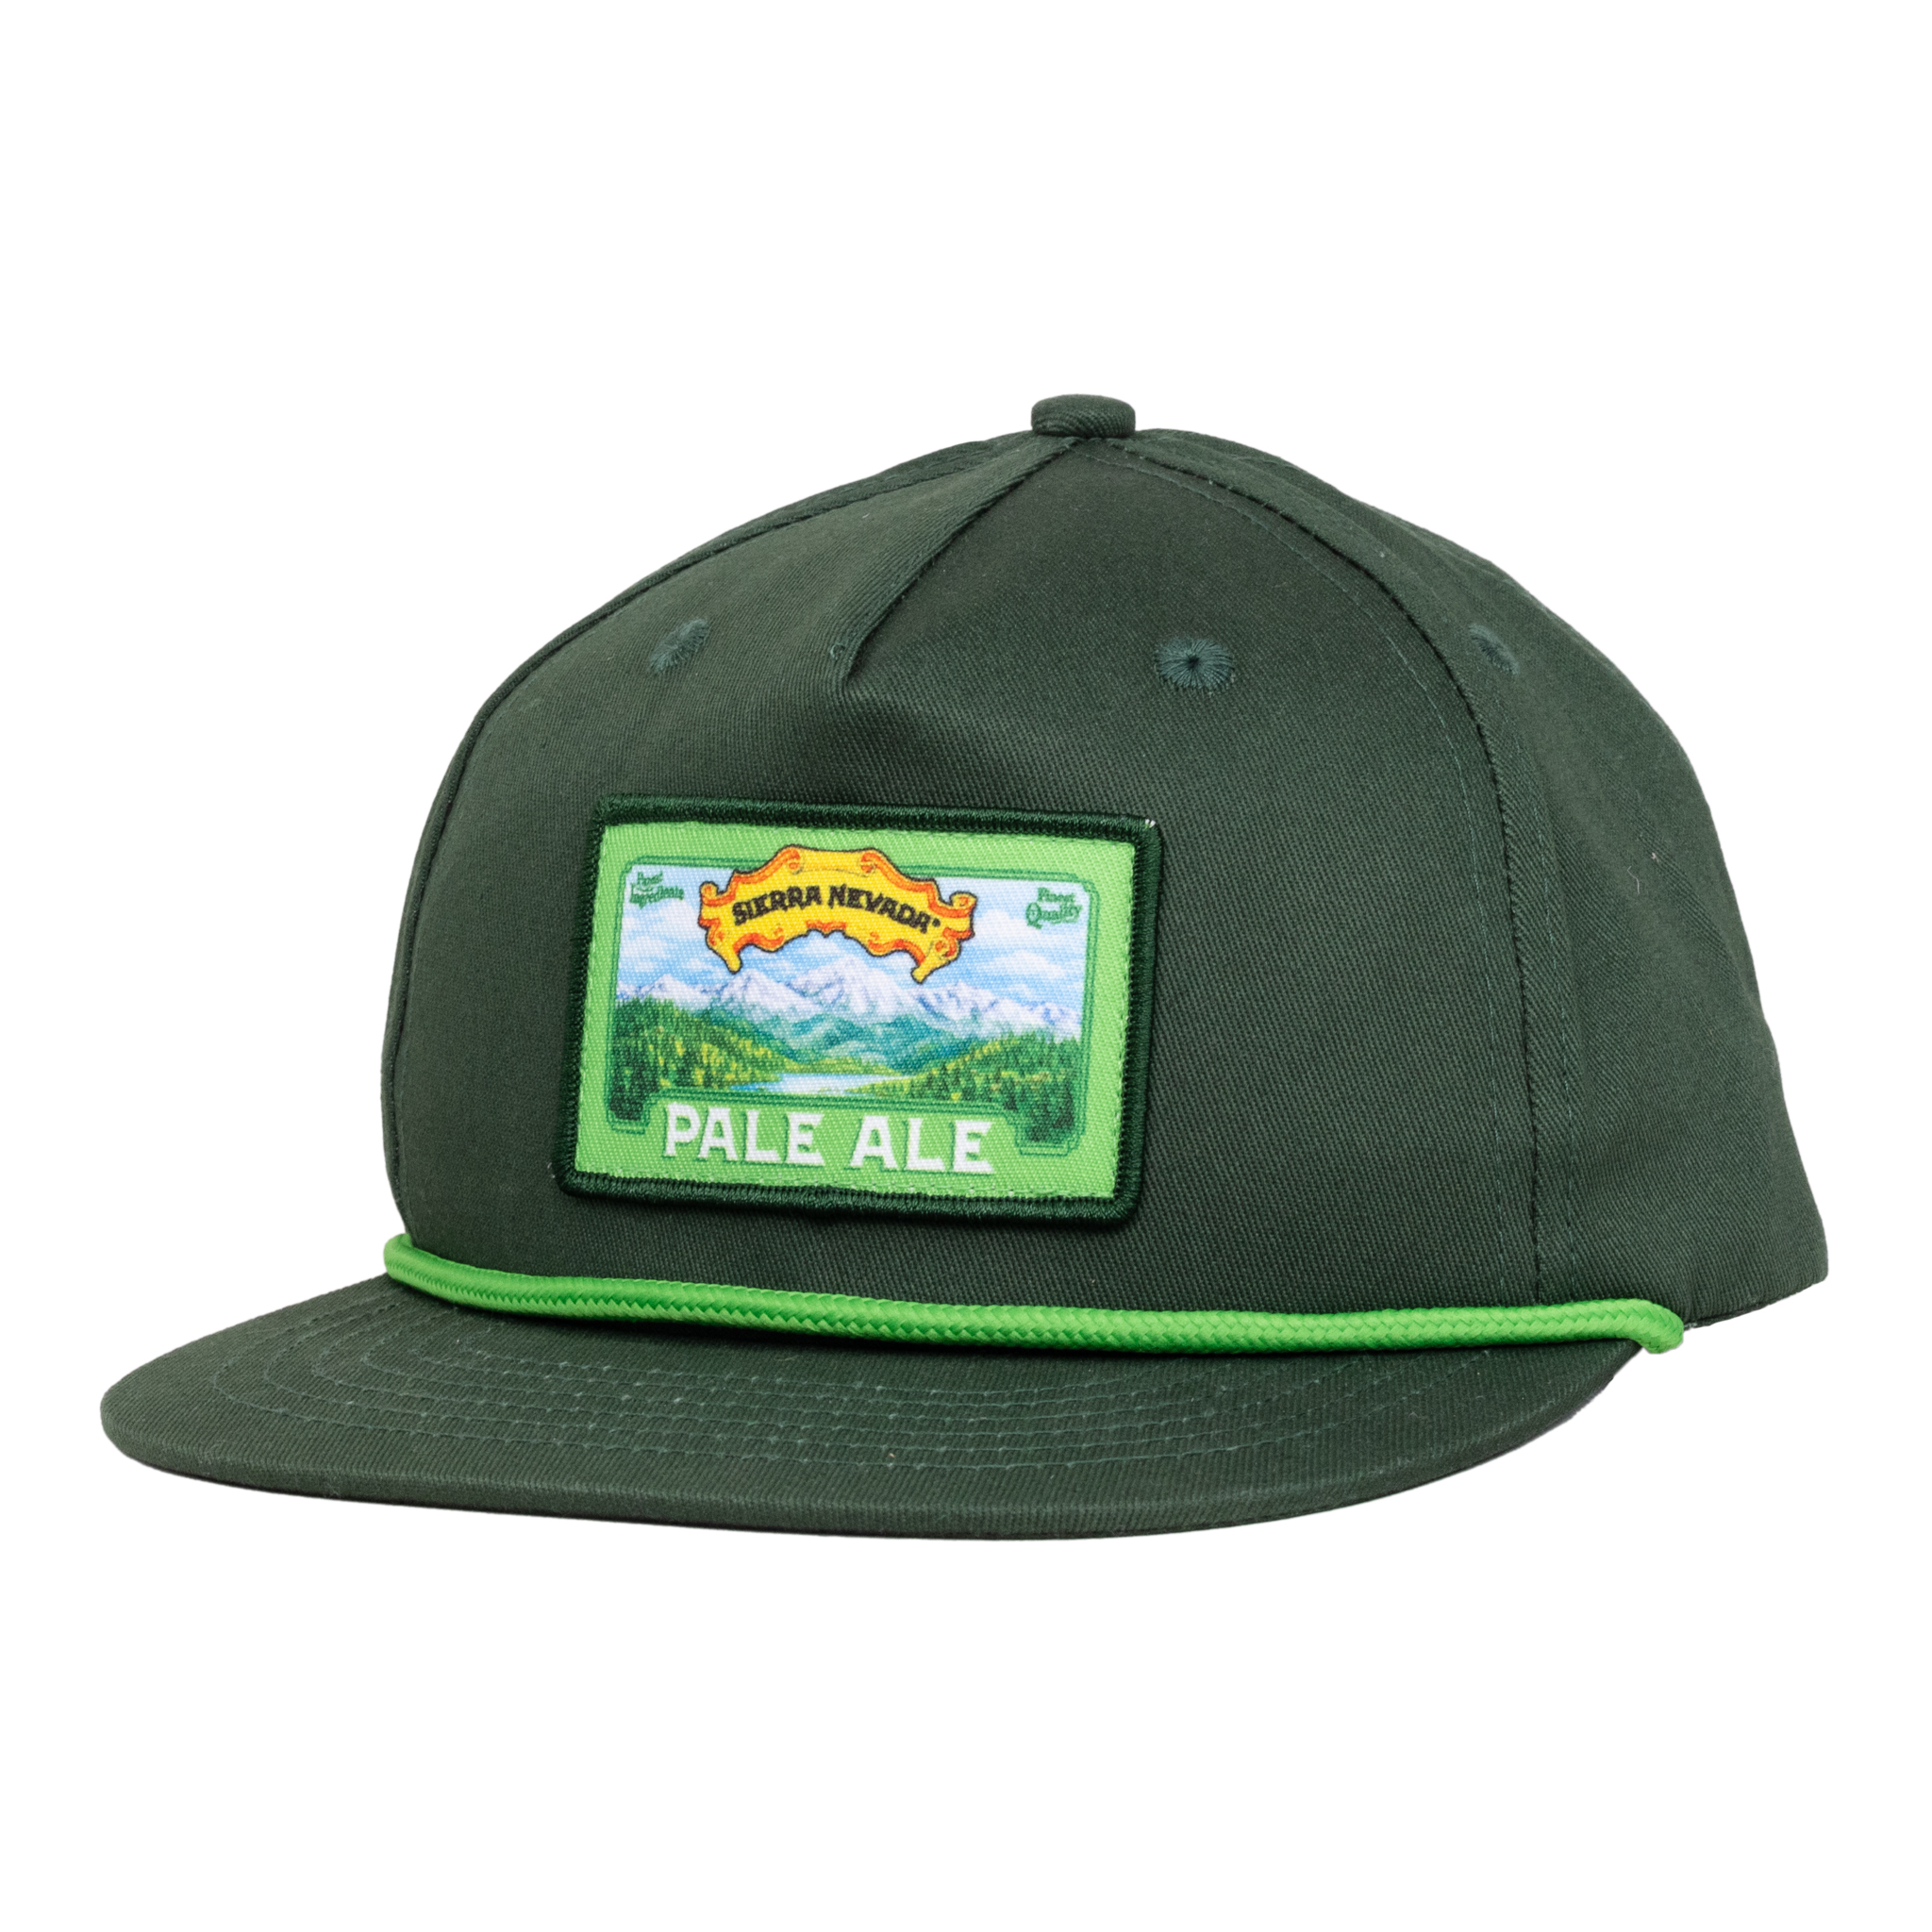 Sierra Nevada Brewing Co. Pale Ale Hat - front view of patch graphic